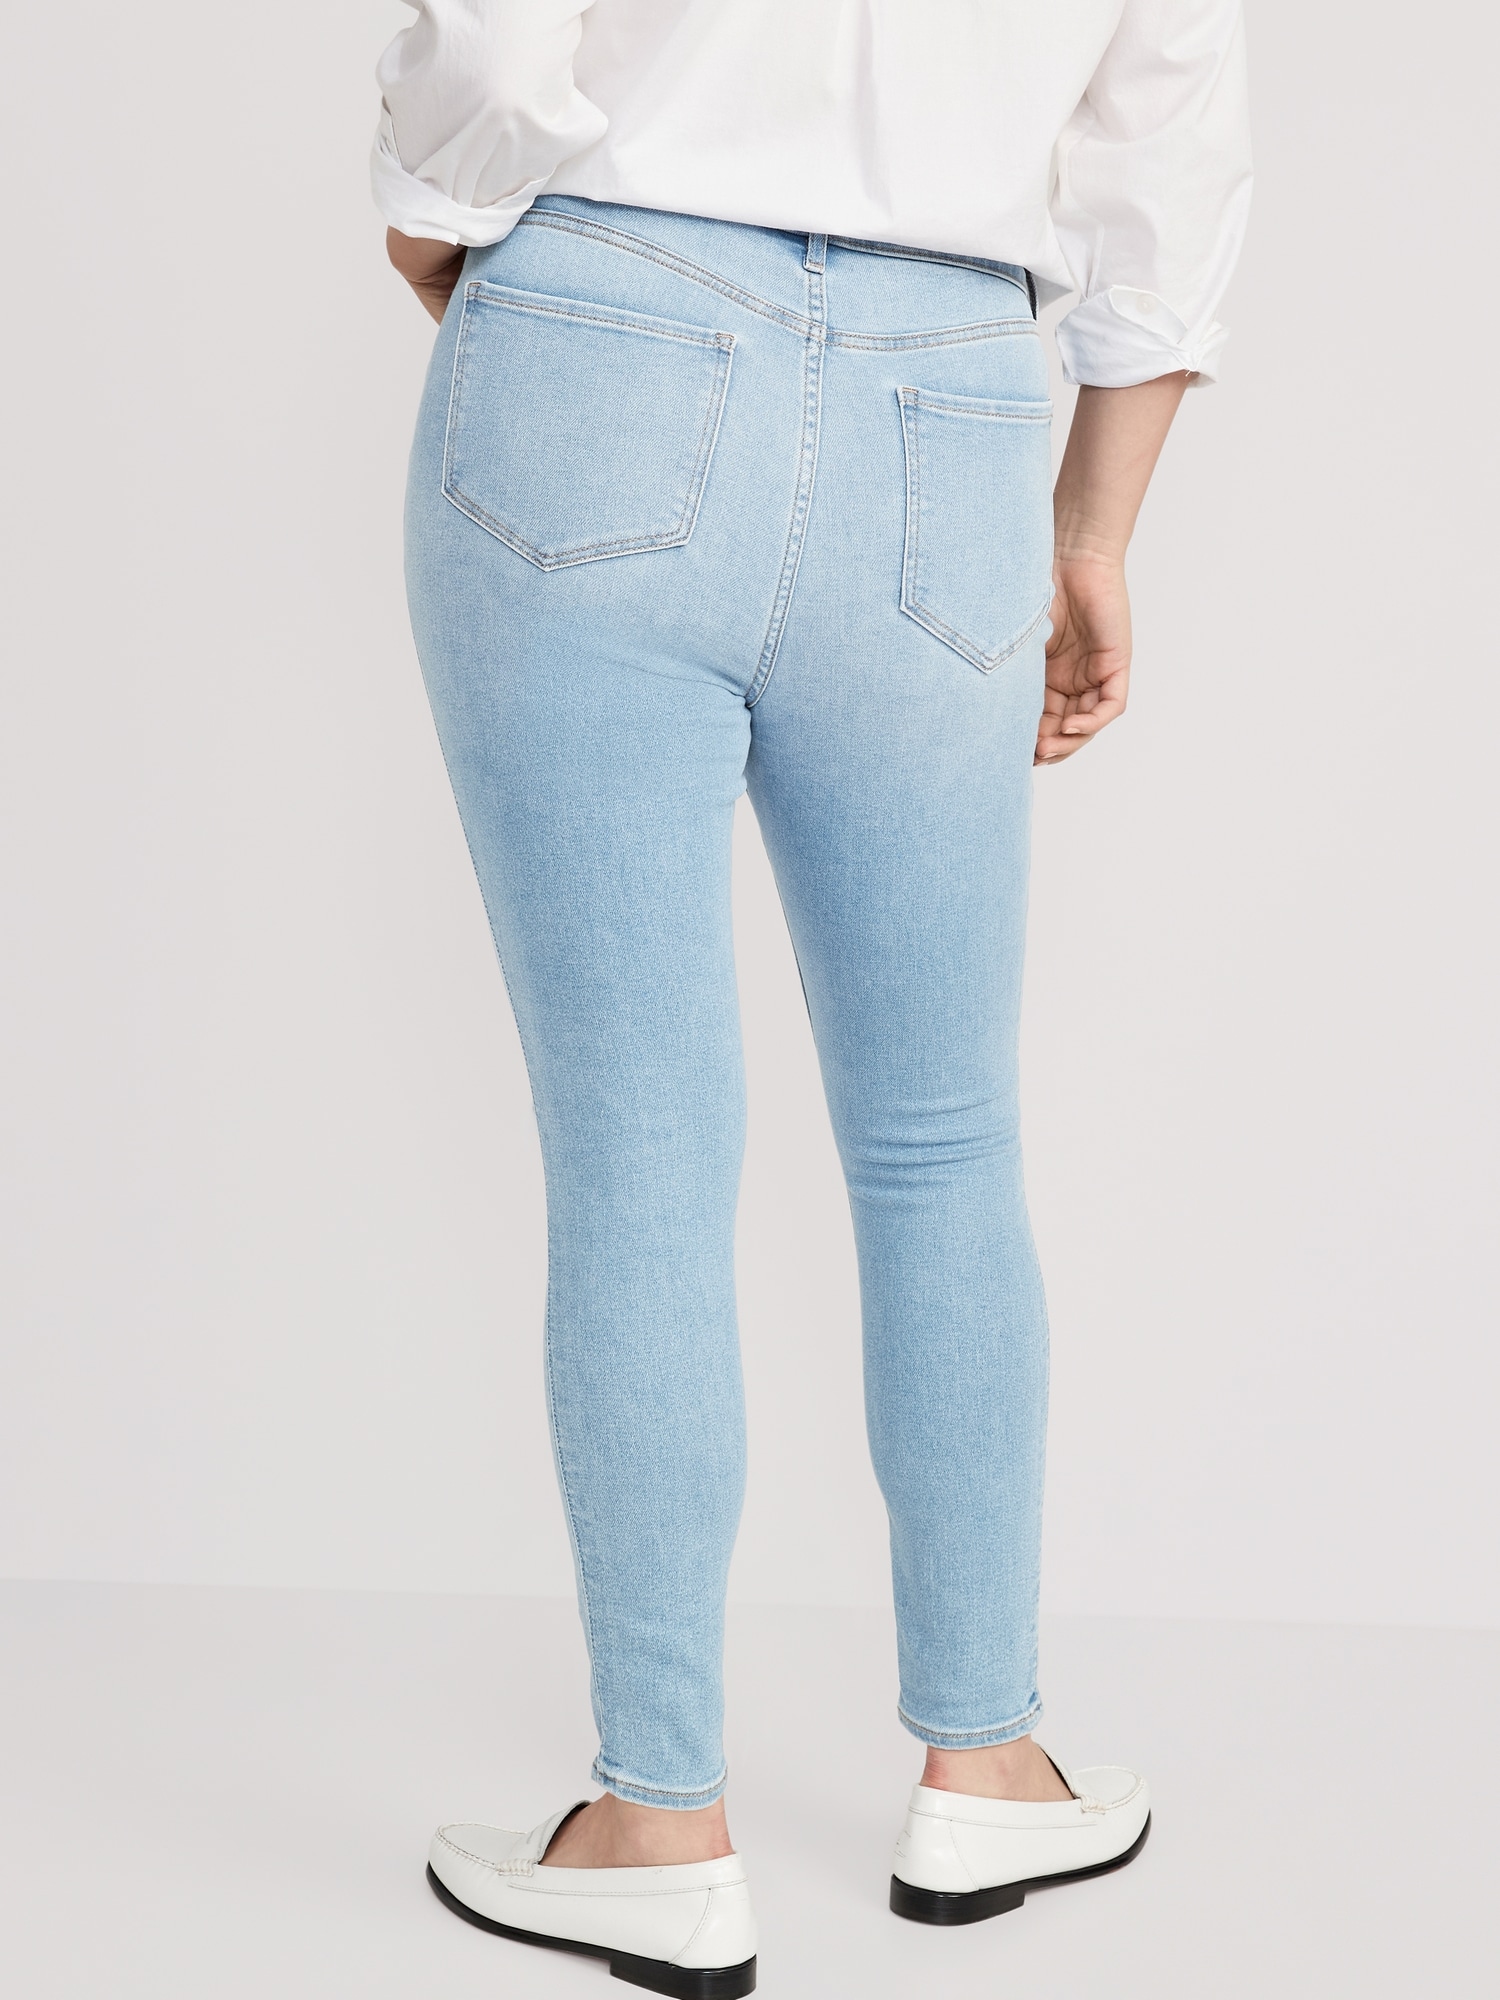 Navy | Women Old Rockstar Extra Jeans for Super-Skinny 360° Stretch High-Waisted